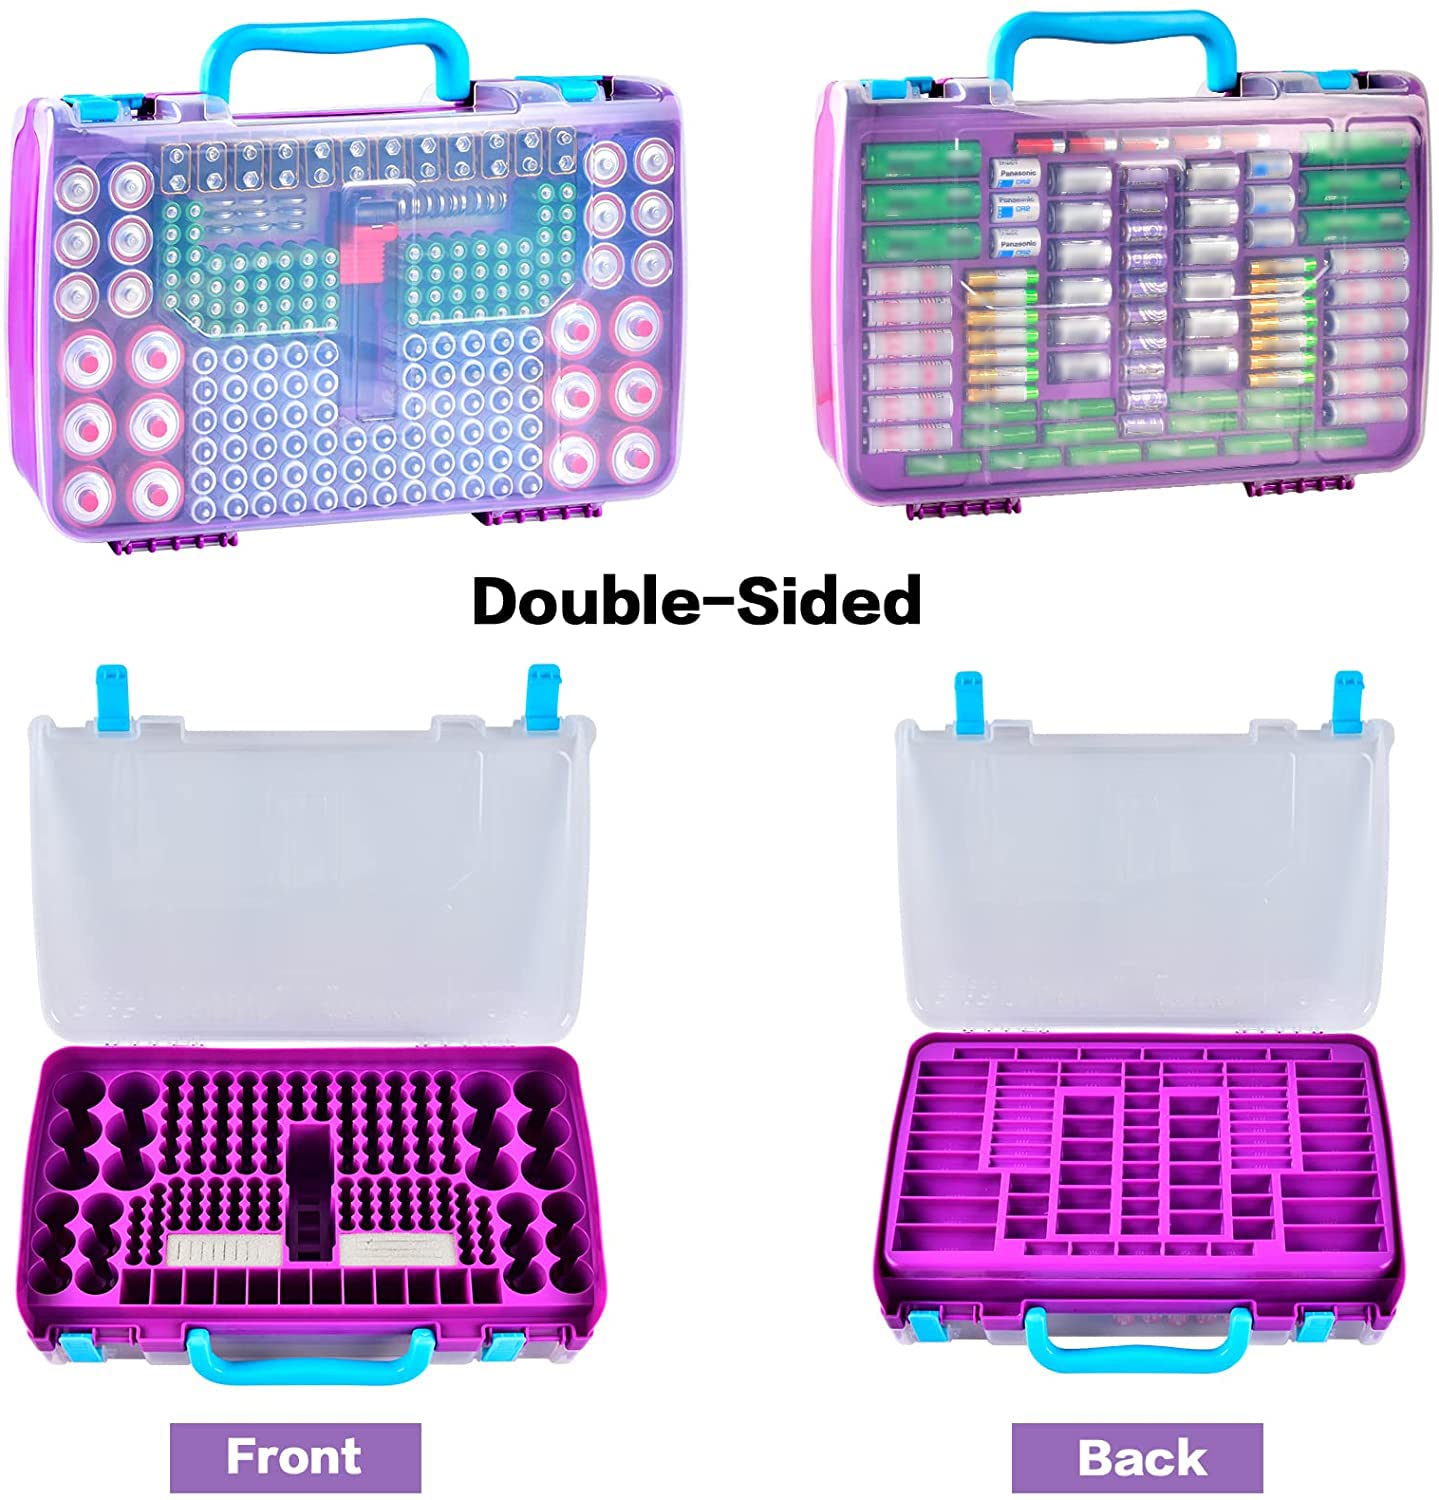 Battery Organizer Storage Case with Tester, Double-Sided Batteries Box Holder Fits for 269 AA AAA AAAA 3A 4A 9V C D Lithium 23A 4LR44 CR123A CR1632 CR2032, Battery Garage Container Keeper- Purple